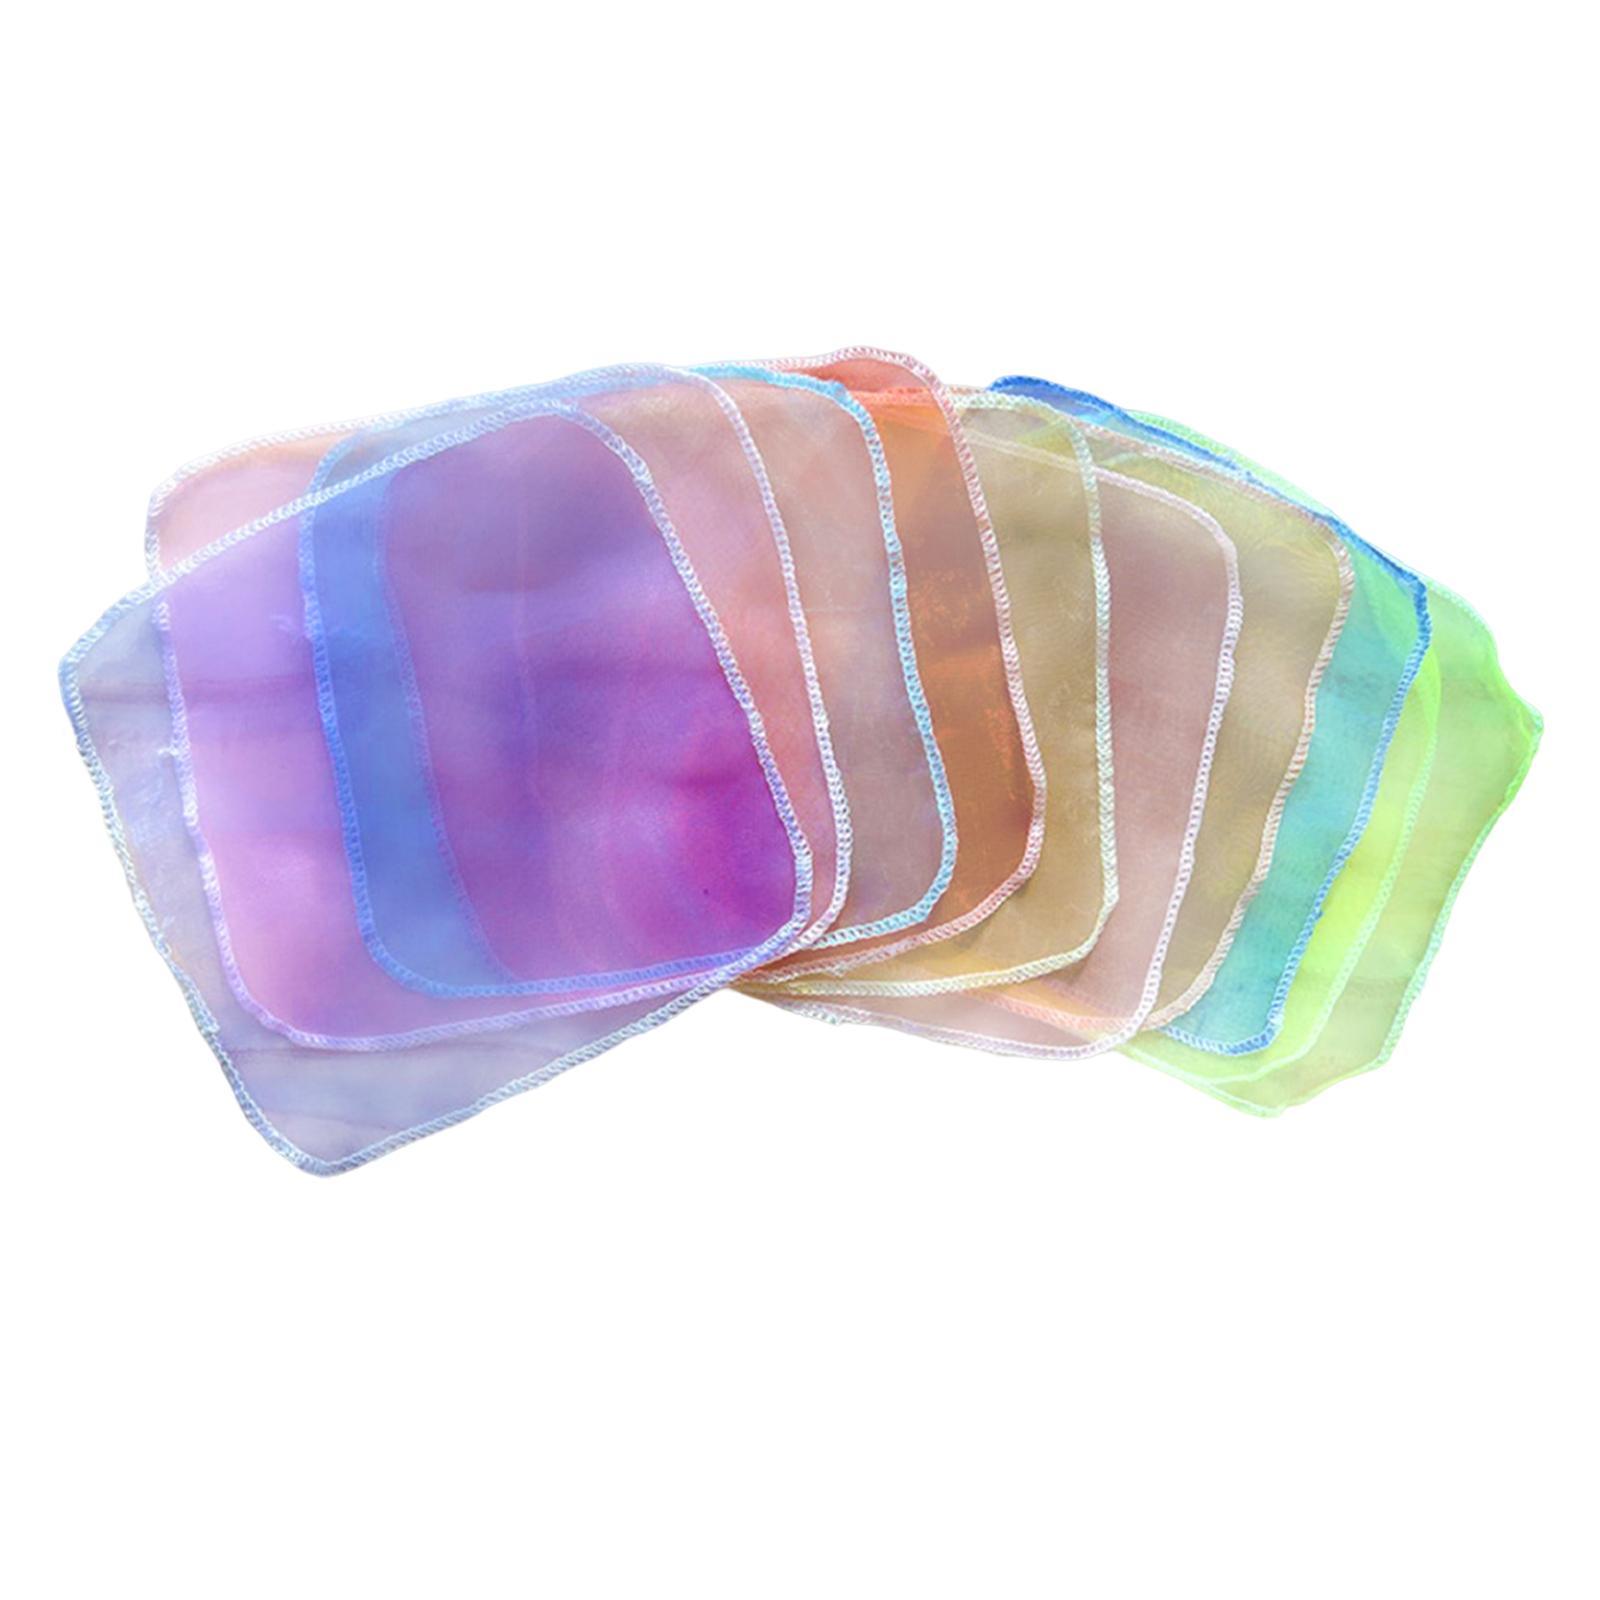 10 Pieces Colorful   Scarf Performance Props Accessories Funny Sensory Toys Dance and Juggling  for Newborn Babies